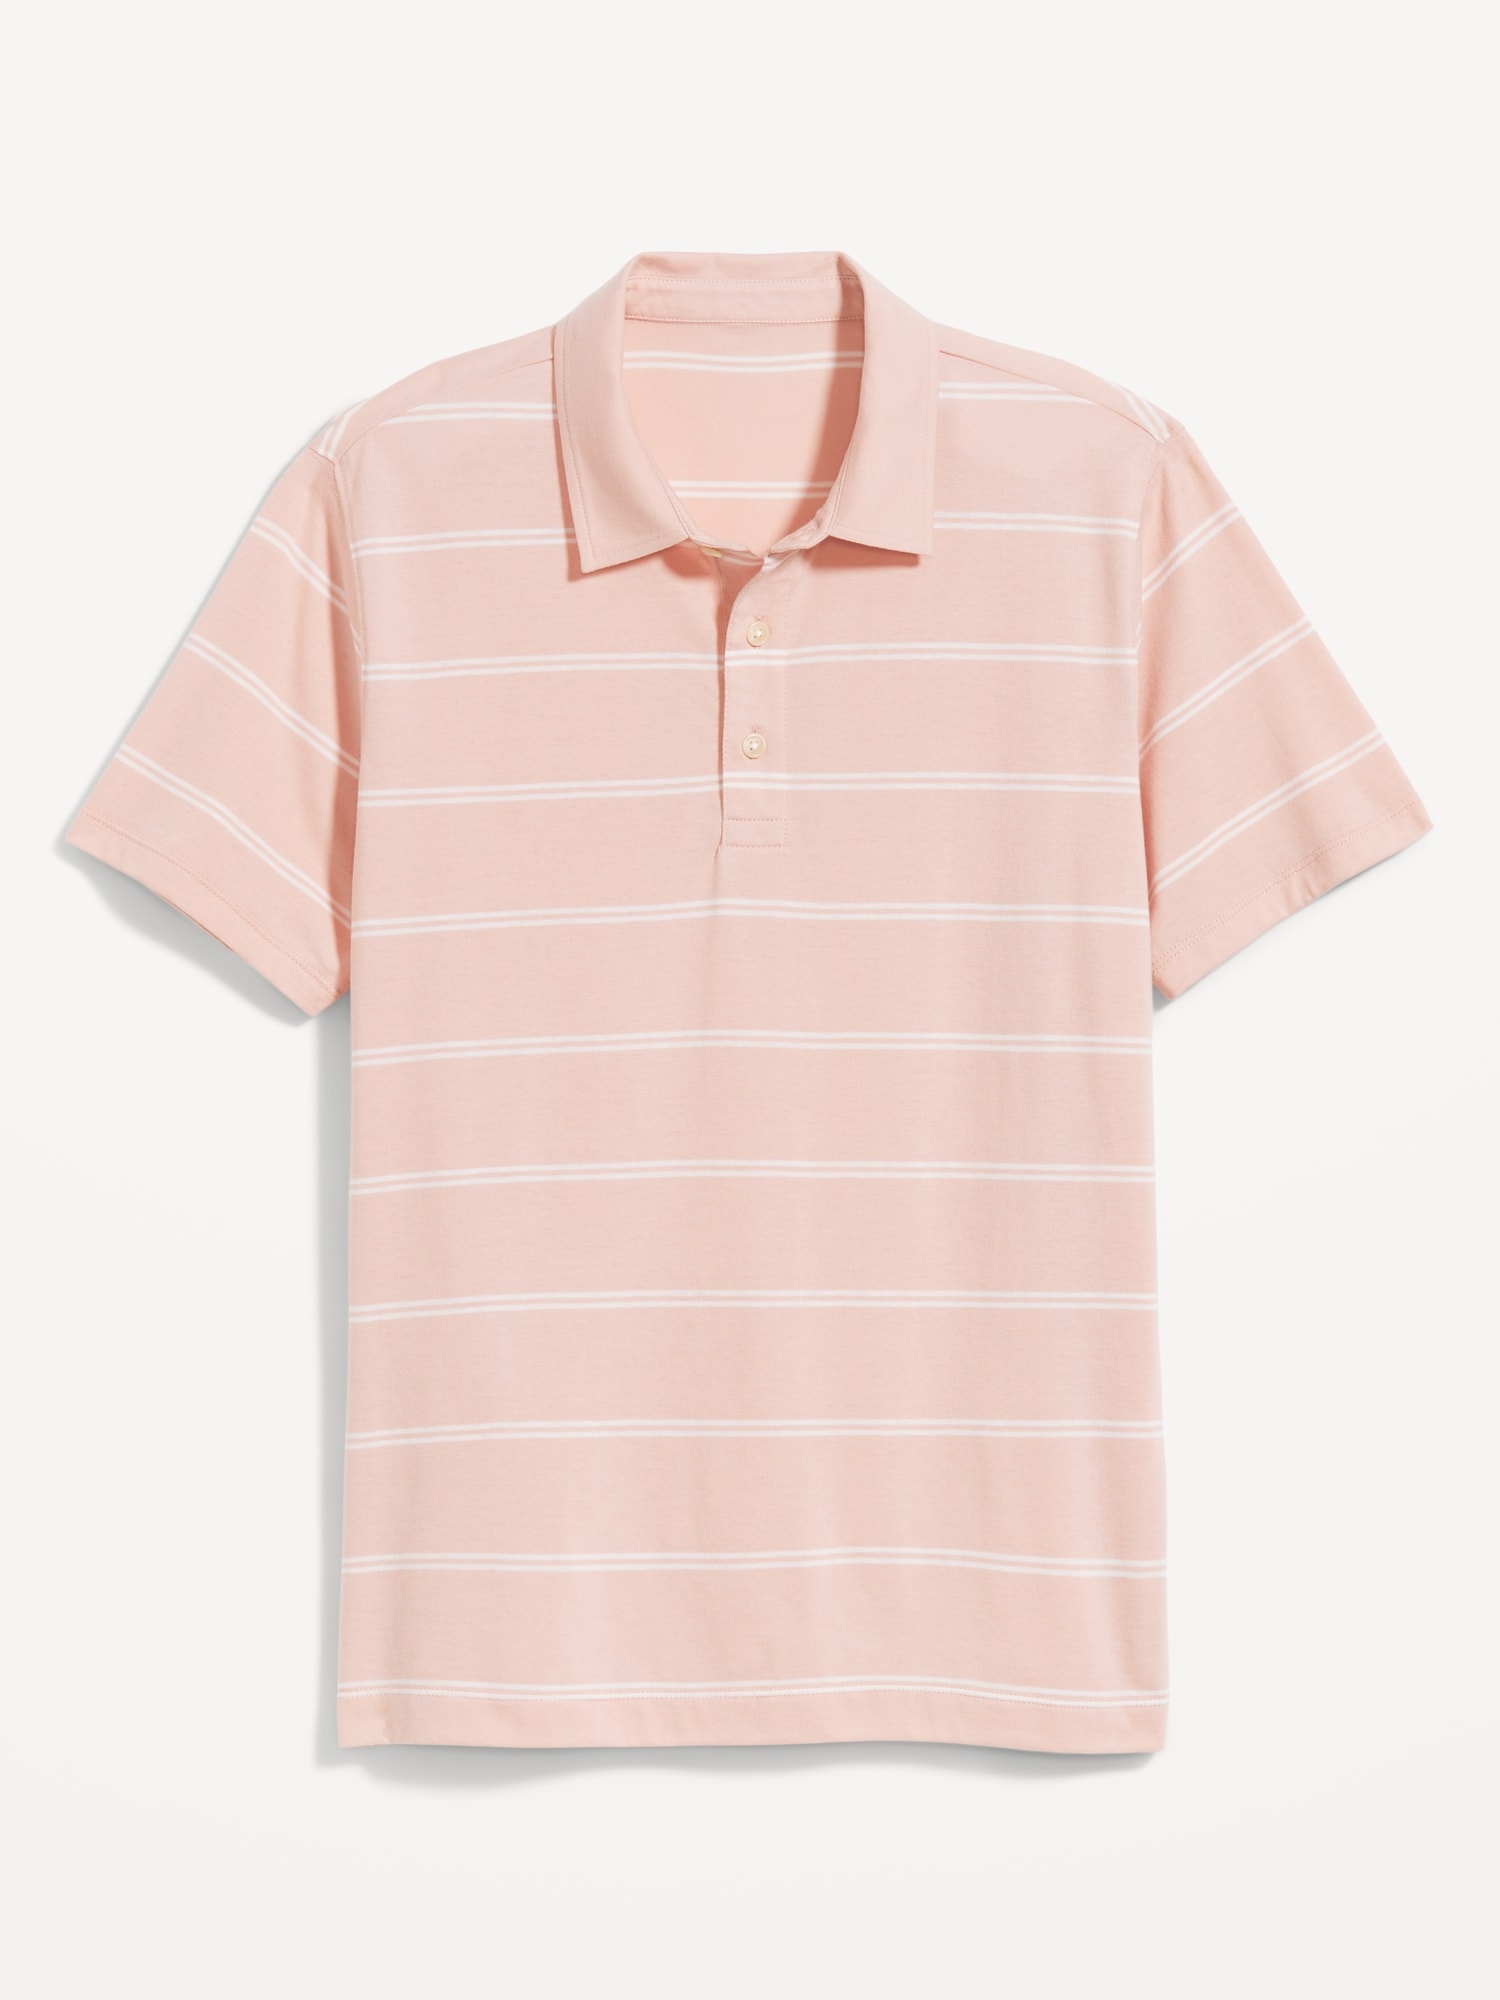 Old Navy Classic Fit Striped Jersey Polo for Men pink. 1